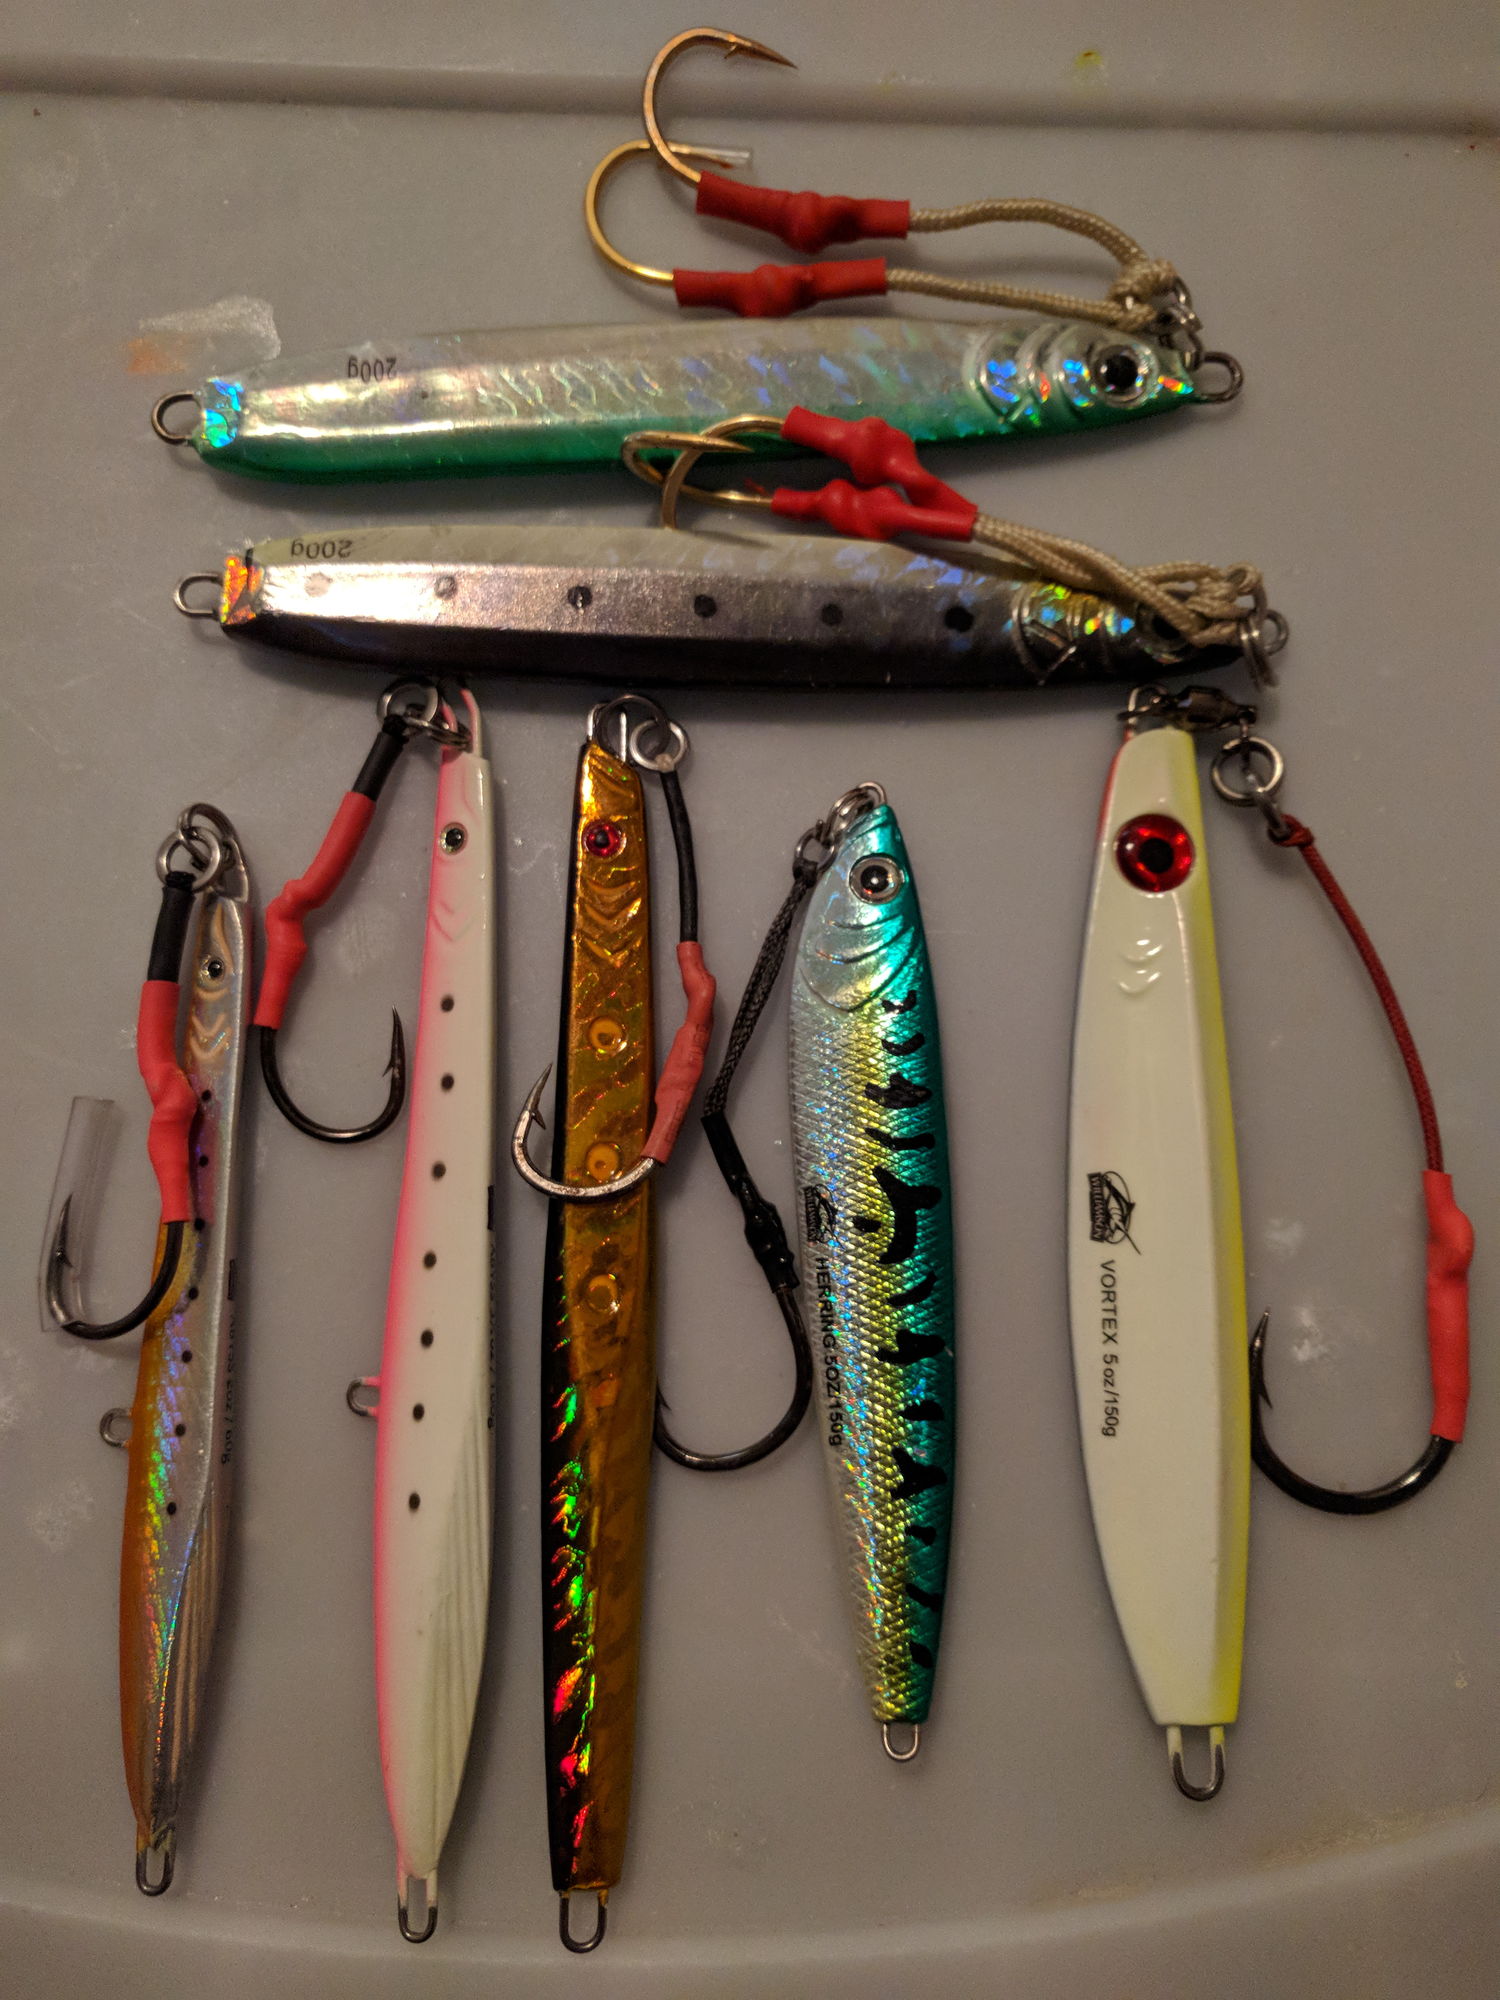 Lot of 7 vertical jigs- SOLD - The Hull Truth - Boating and Fishing Forum